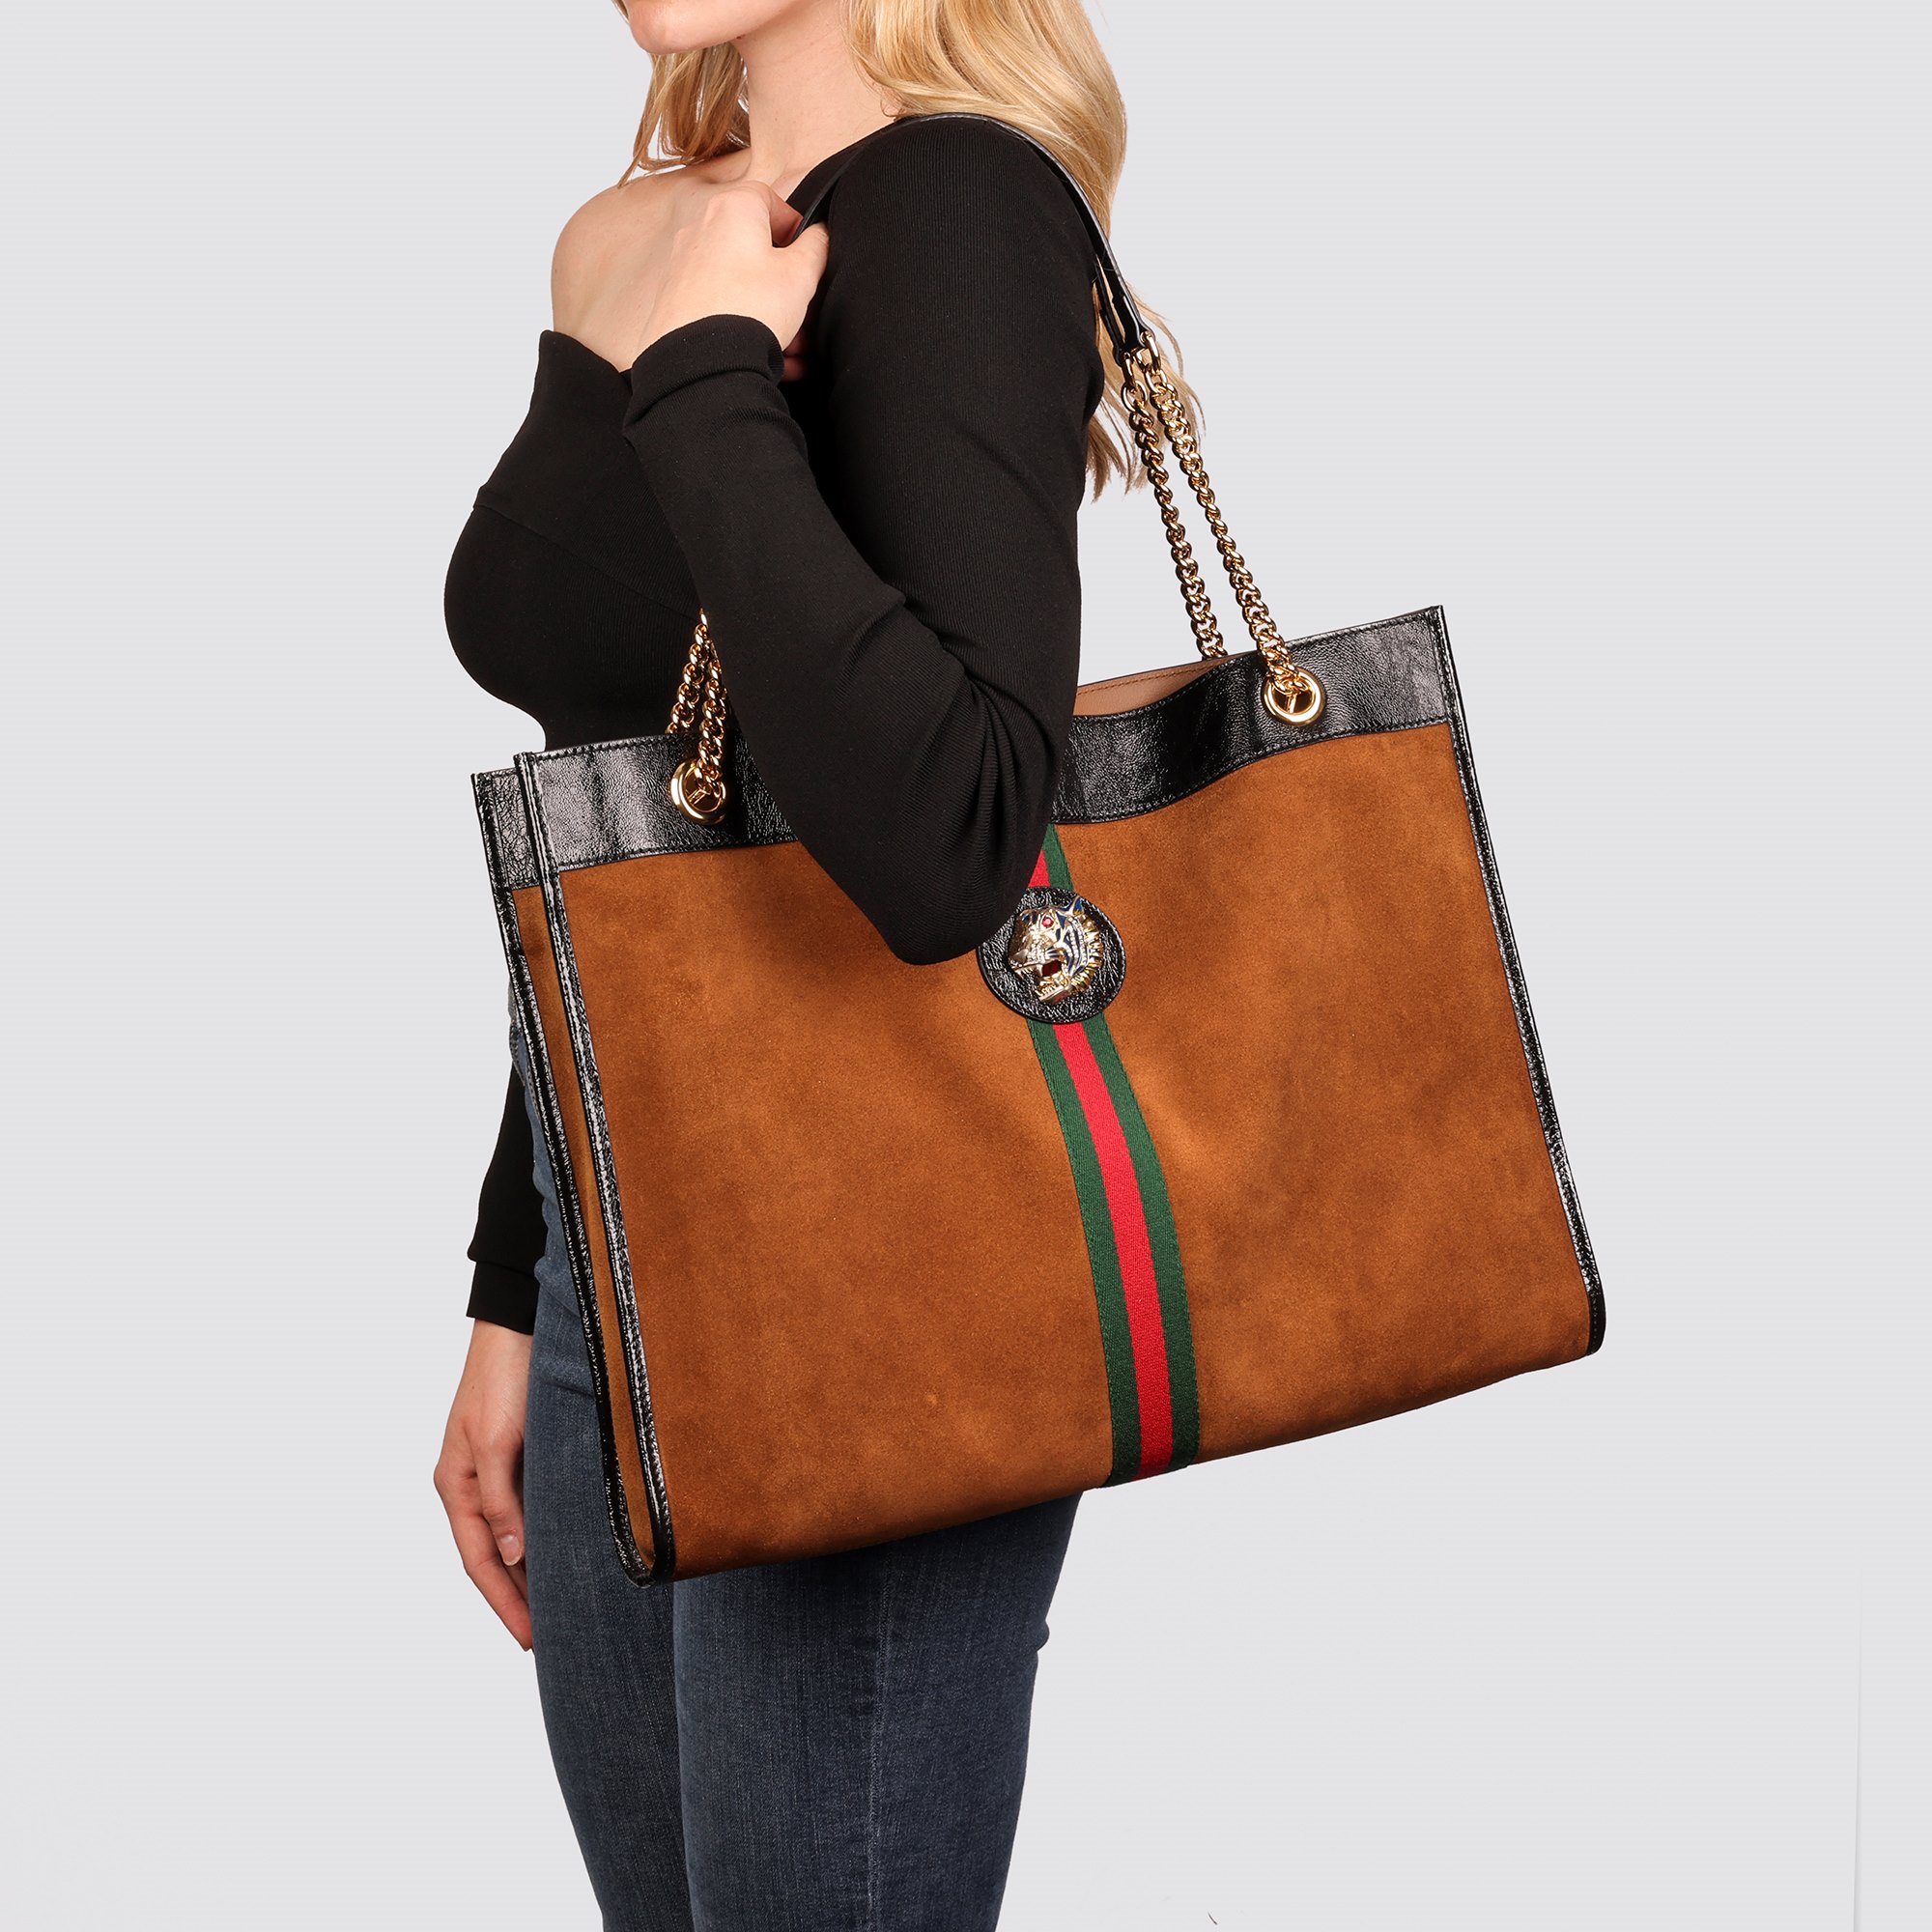 Gucci Brown Suede & Black Patent Leather Maxi Rajah Tote